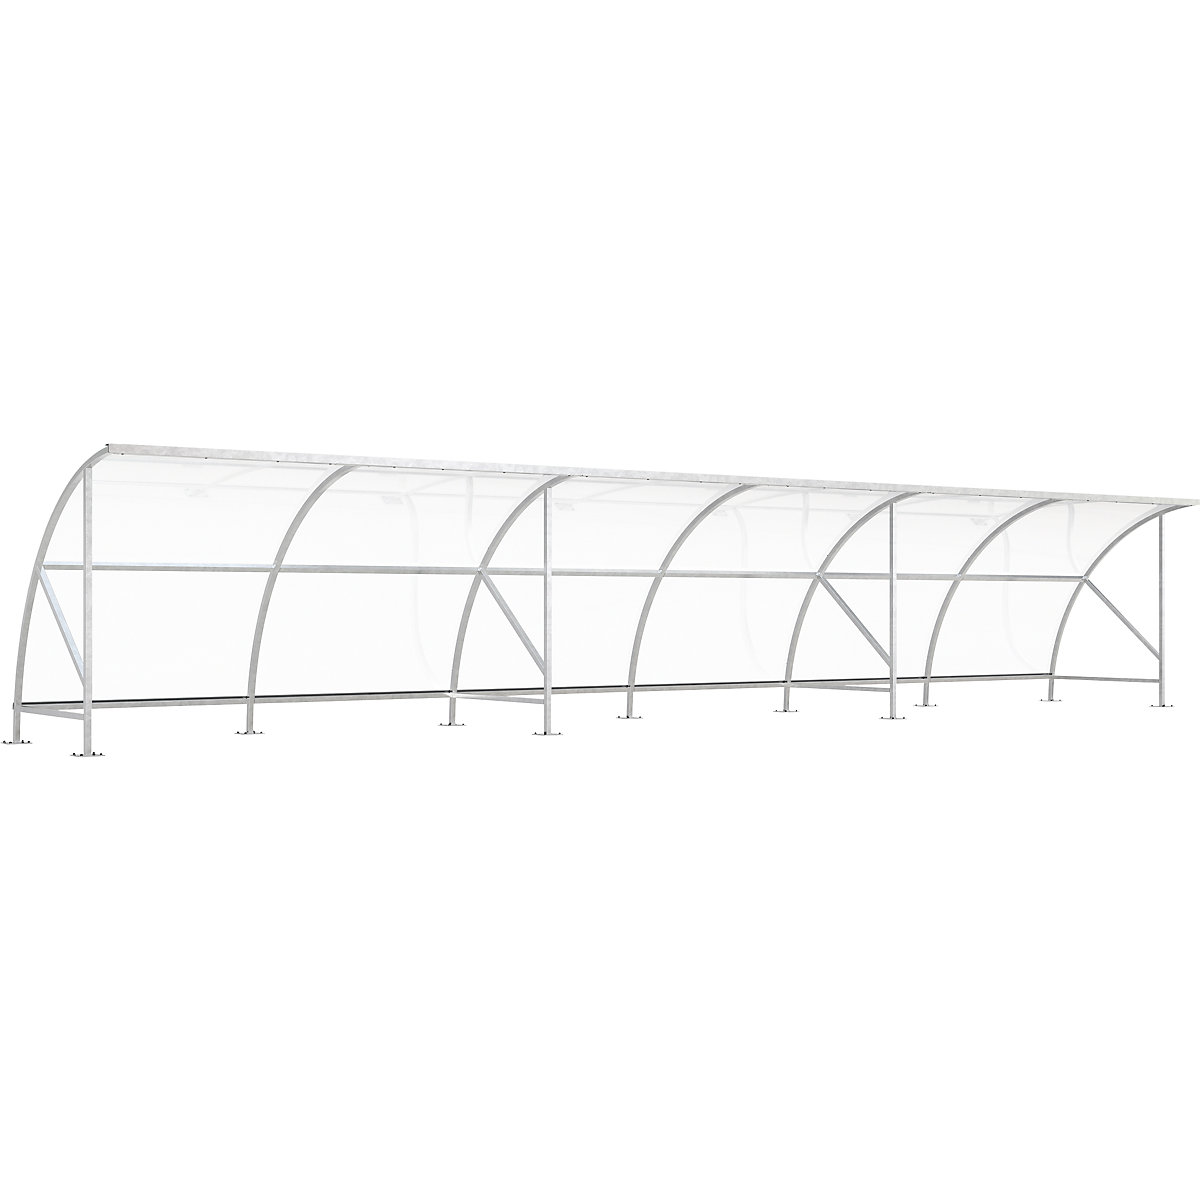 Bicycle shelter, made of polycarbonate, WxD 12350 x 2100 mm, silver-2